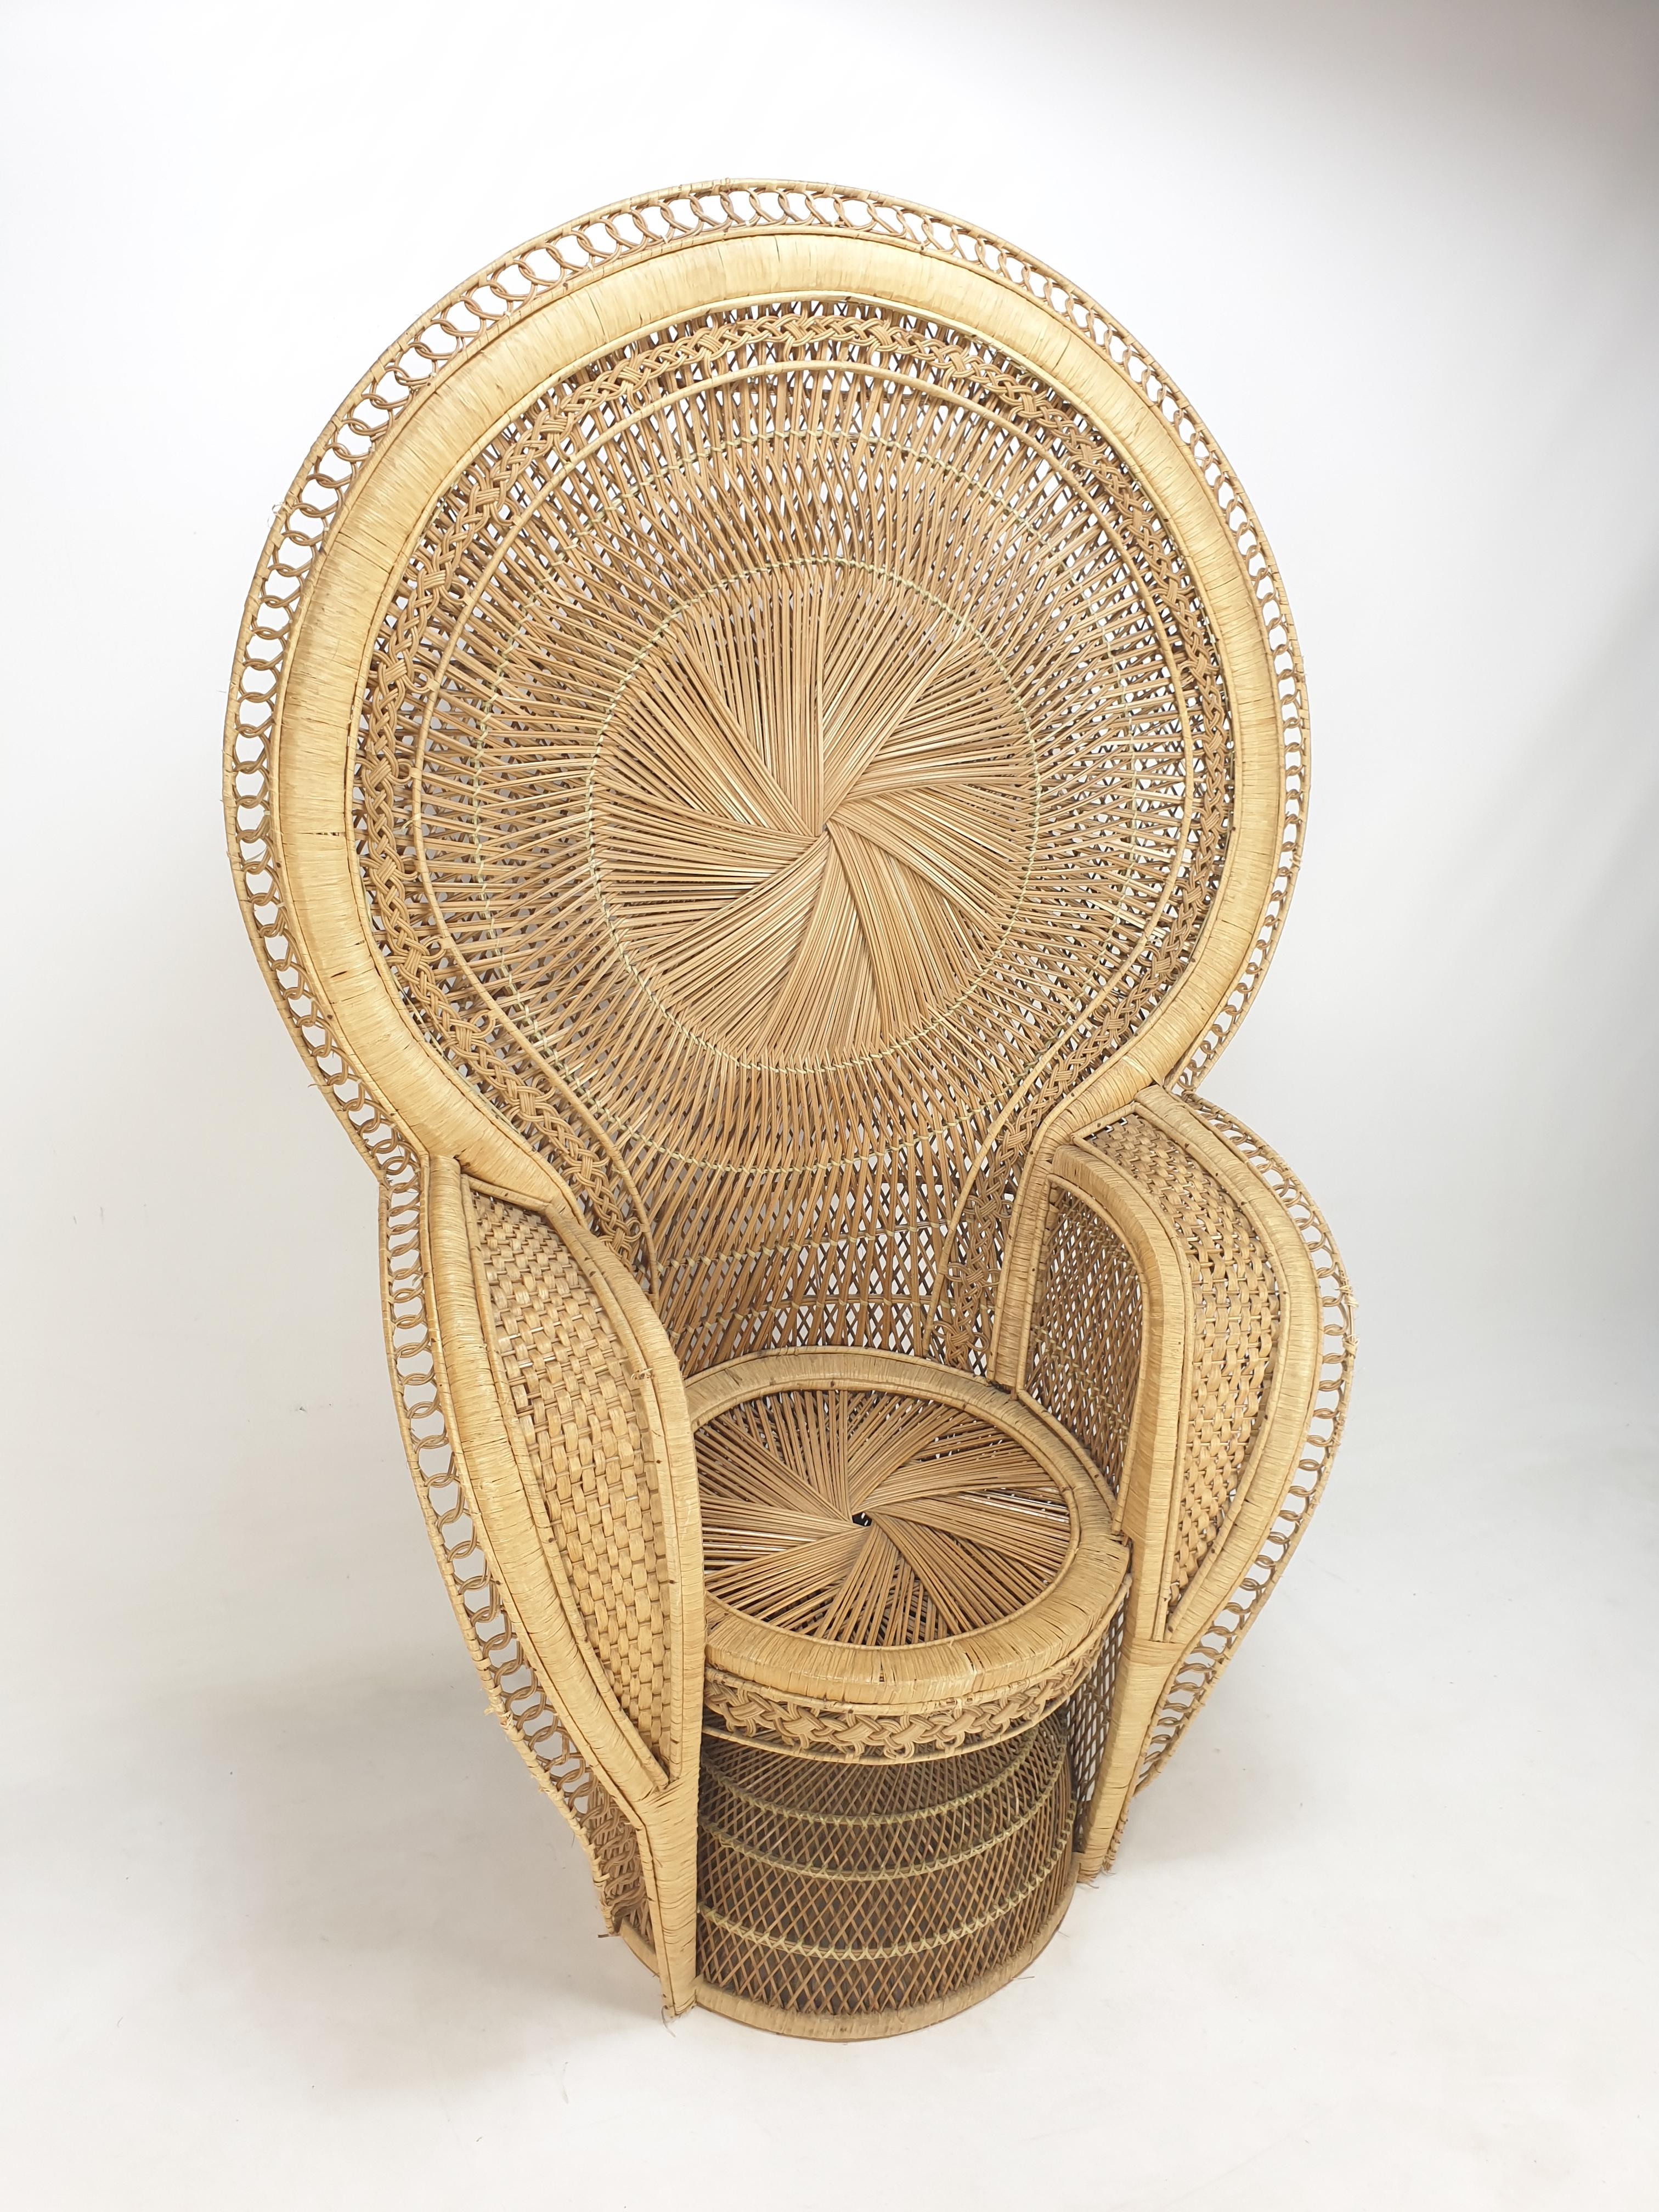 Italian Midcentury Emmanuelle or Peacock Rattan and Wicker Chair, Italy 1960s For Sale